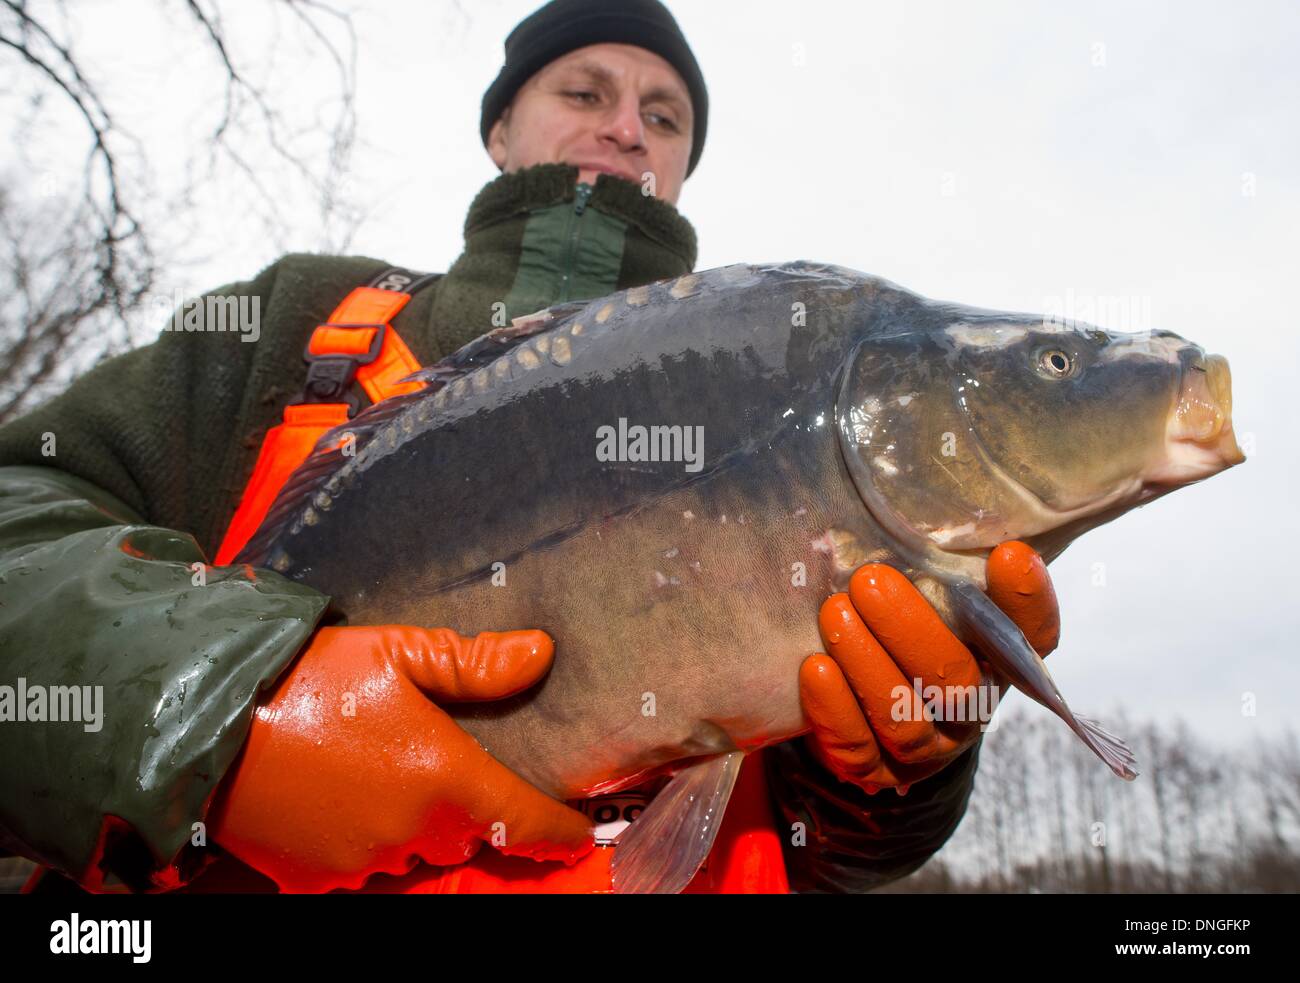 Gross Schauen, Germany. 28th Dec, 2013. Fisher Danny Koch of fishery Koellnitz e.G. shows a carp in Gross Schauen, Germany, 28 December 2013. Many families traditionally eat carp at the turn of the year. Photo: Patrick Pleul/dpa/Alamy Live News Stock Photo